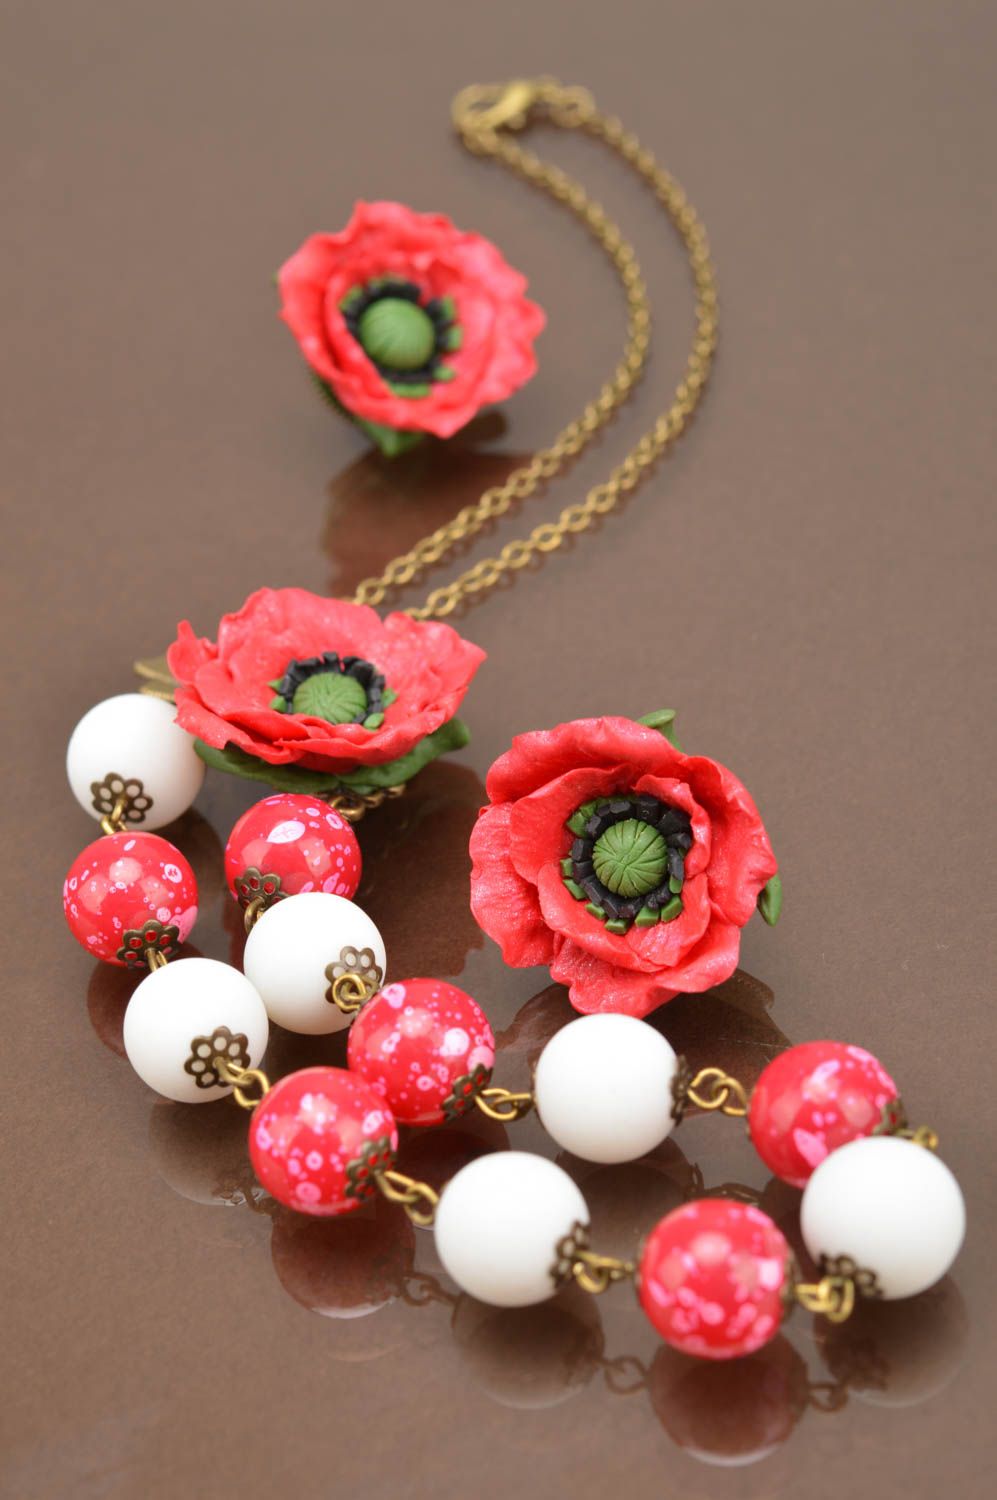 Handmade floral polymer clay jewelry set earrings and necklace with red poppies photo 5